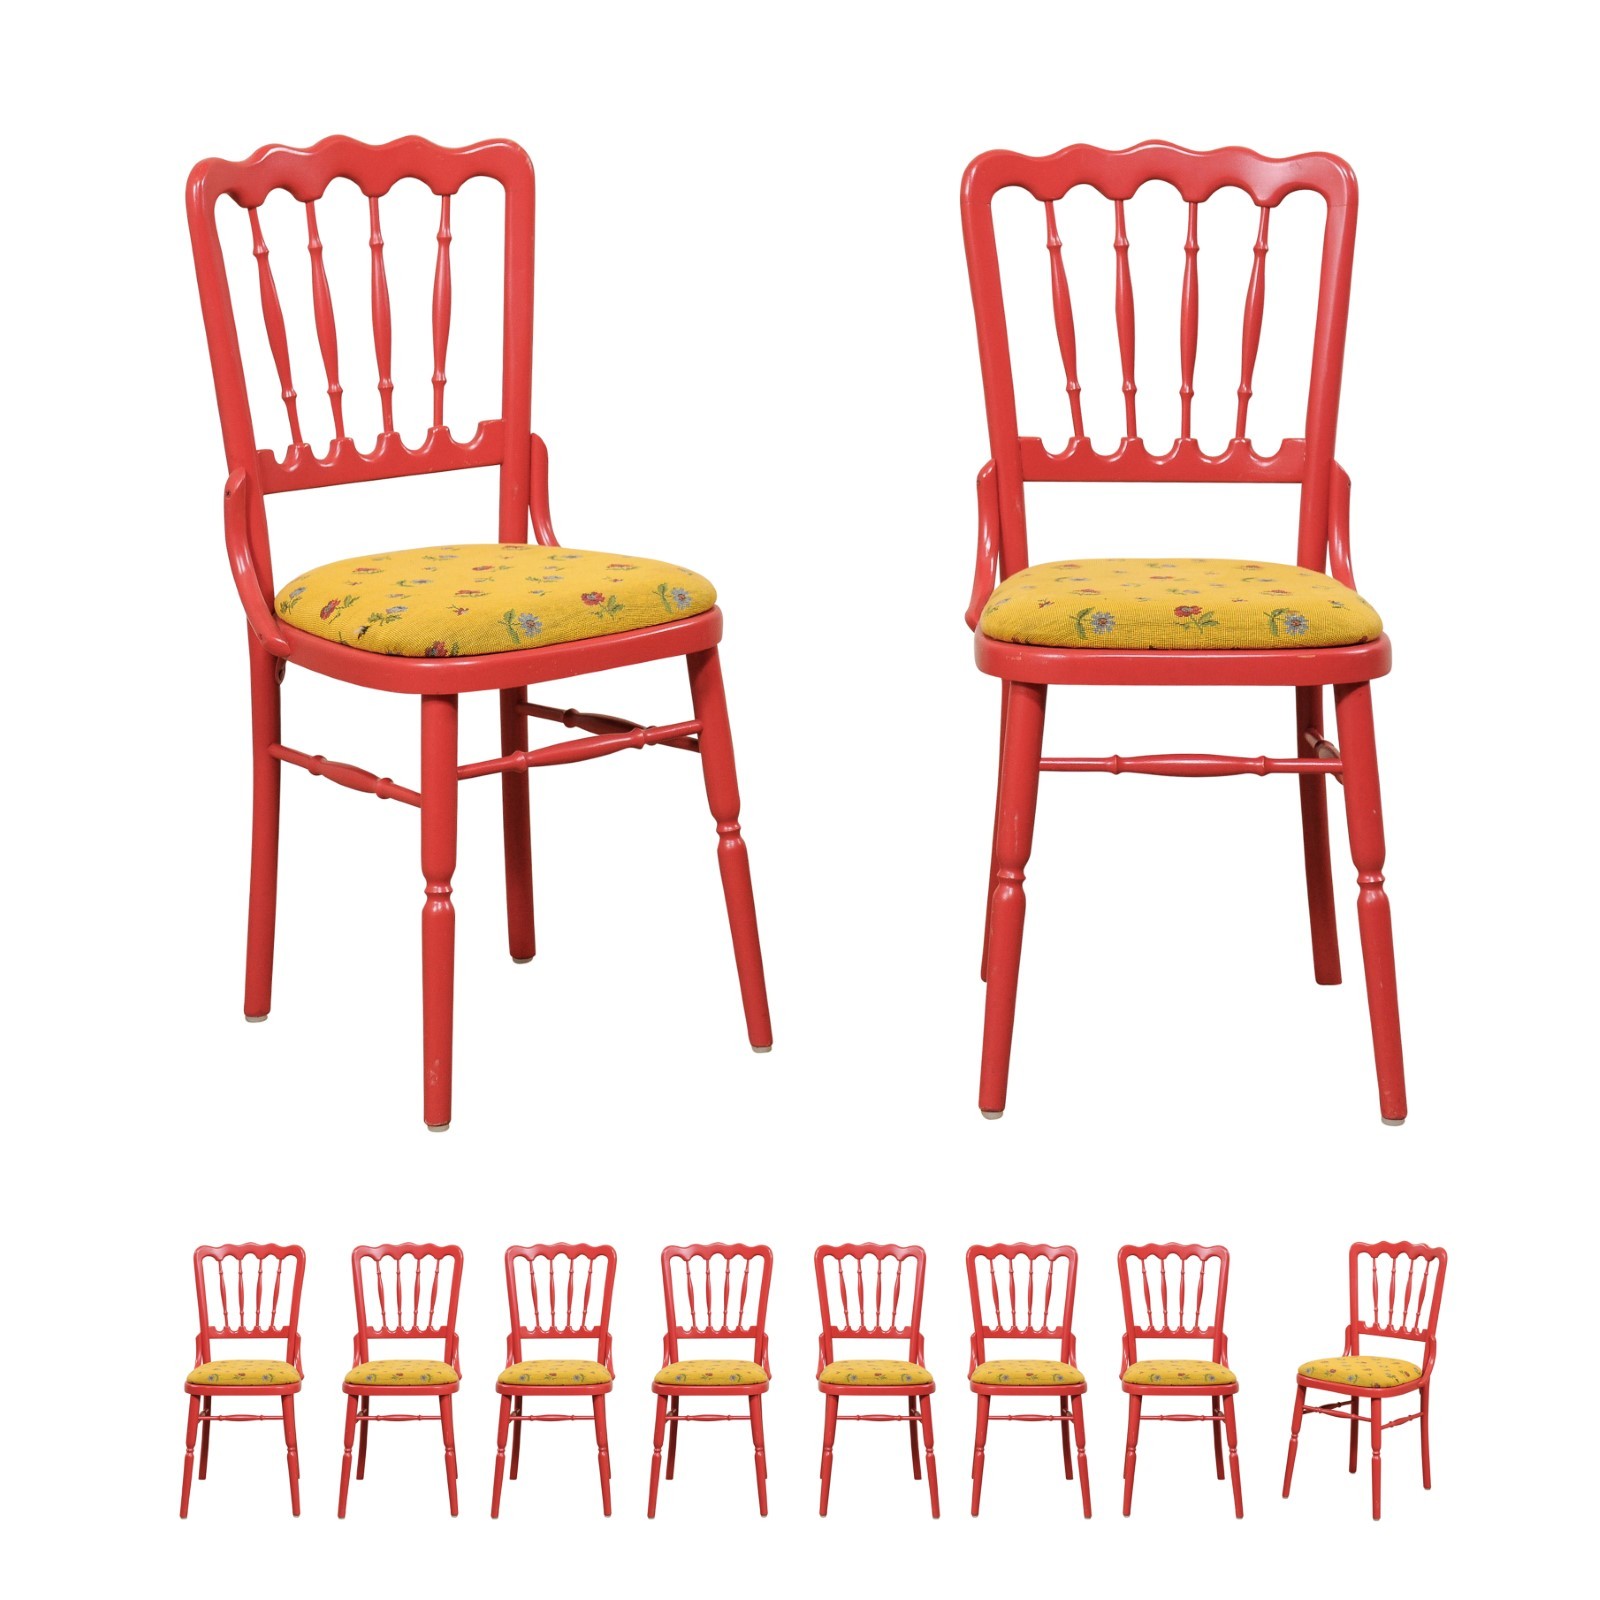 Set of 10 Cute Red Spindle Back Side Chairs